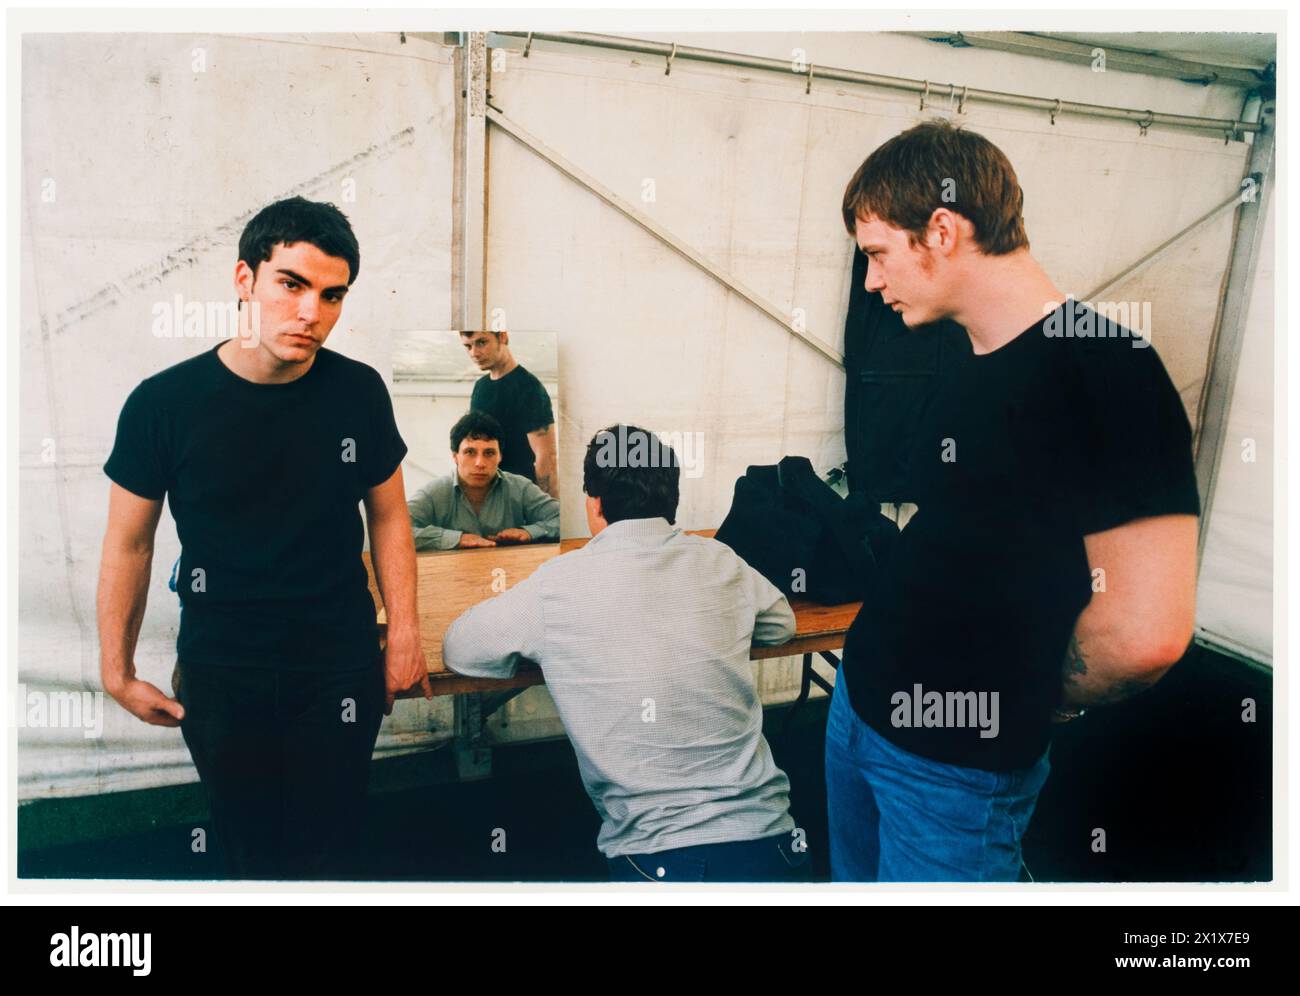 STEREOPHONICS, ORIGINAL LINEUP, BACKSTAGE PORTRAIT, CARDIFF CASTLE, 1998: The original Stereophonics line-up backstage at Cardiff Castle for their first concert at the iconic venue in Cardiff, Wales, UK on 12 June 1998. Photo: Rob Watkins. Stock Photo